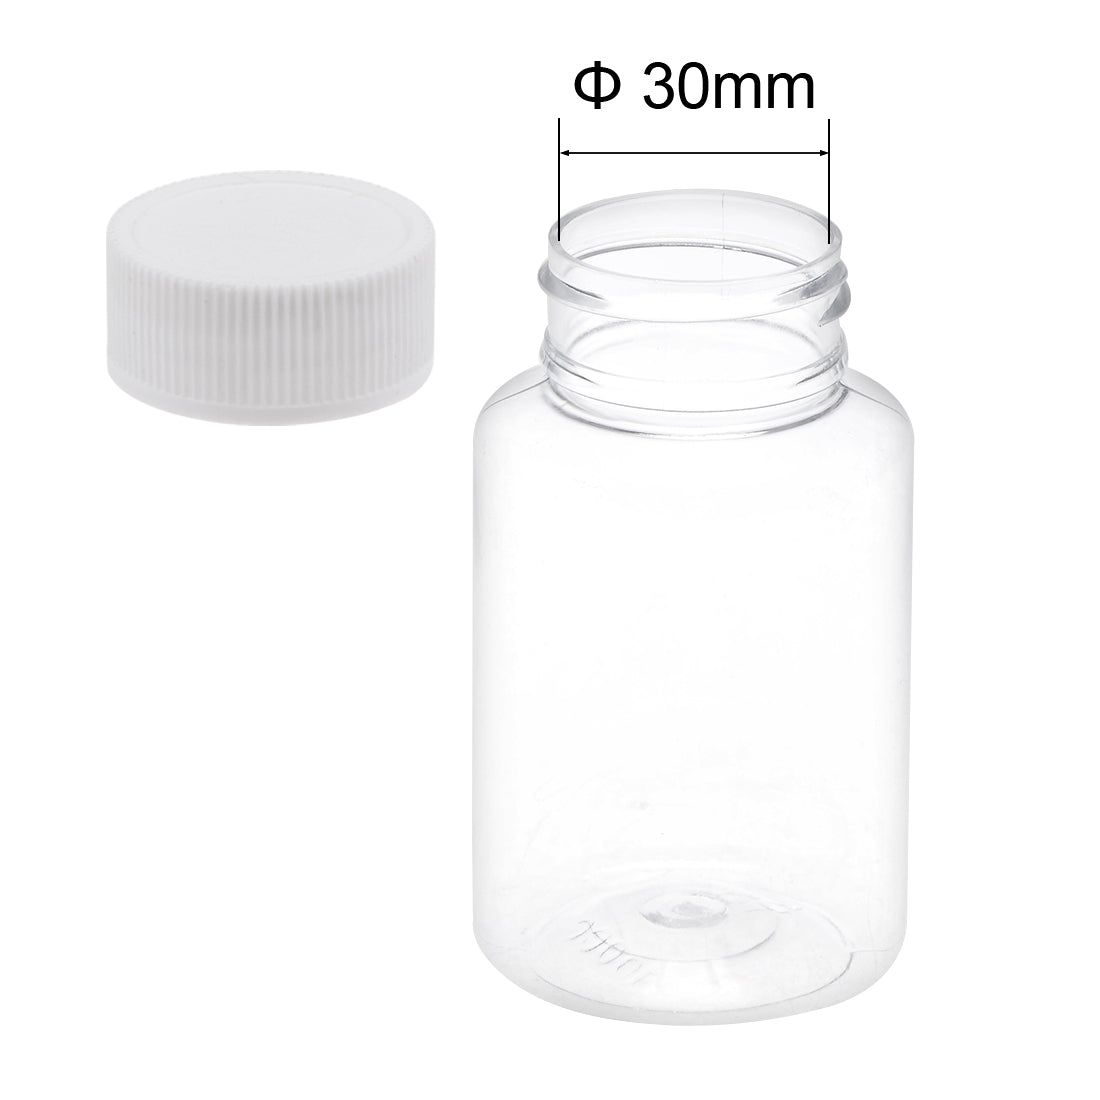 Uxcell Uxcell 3.4 oz/100ml PET Plastic Lab Chemical Reagent Bottle Wide Mouth Liquid/ Solid Storage Container Clear Bottles w Tamper Evident Caps 5pcs